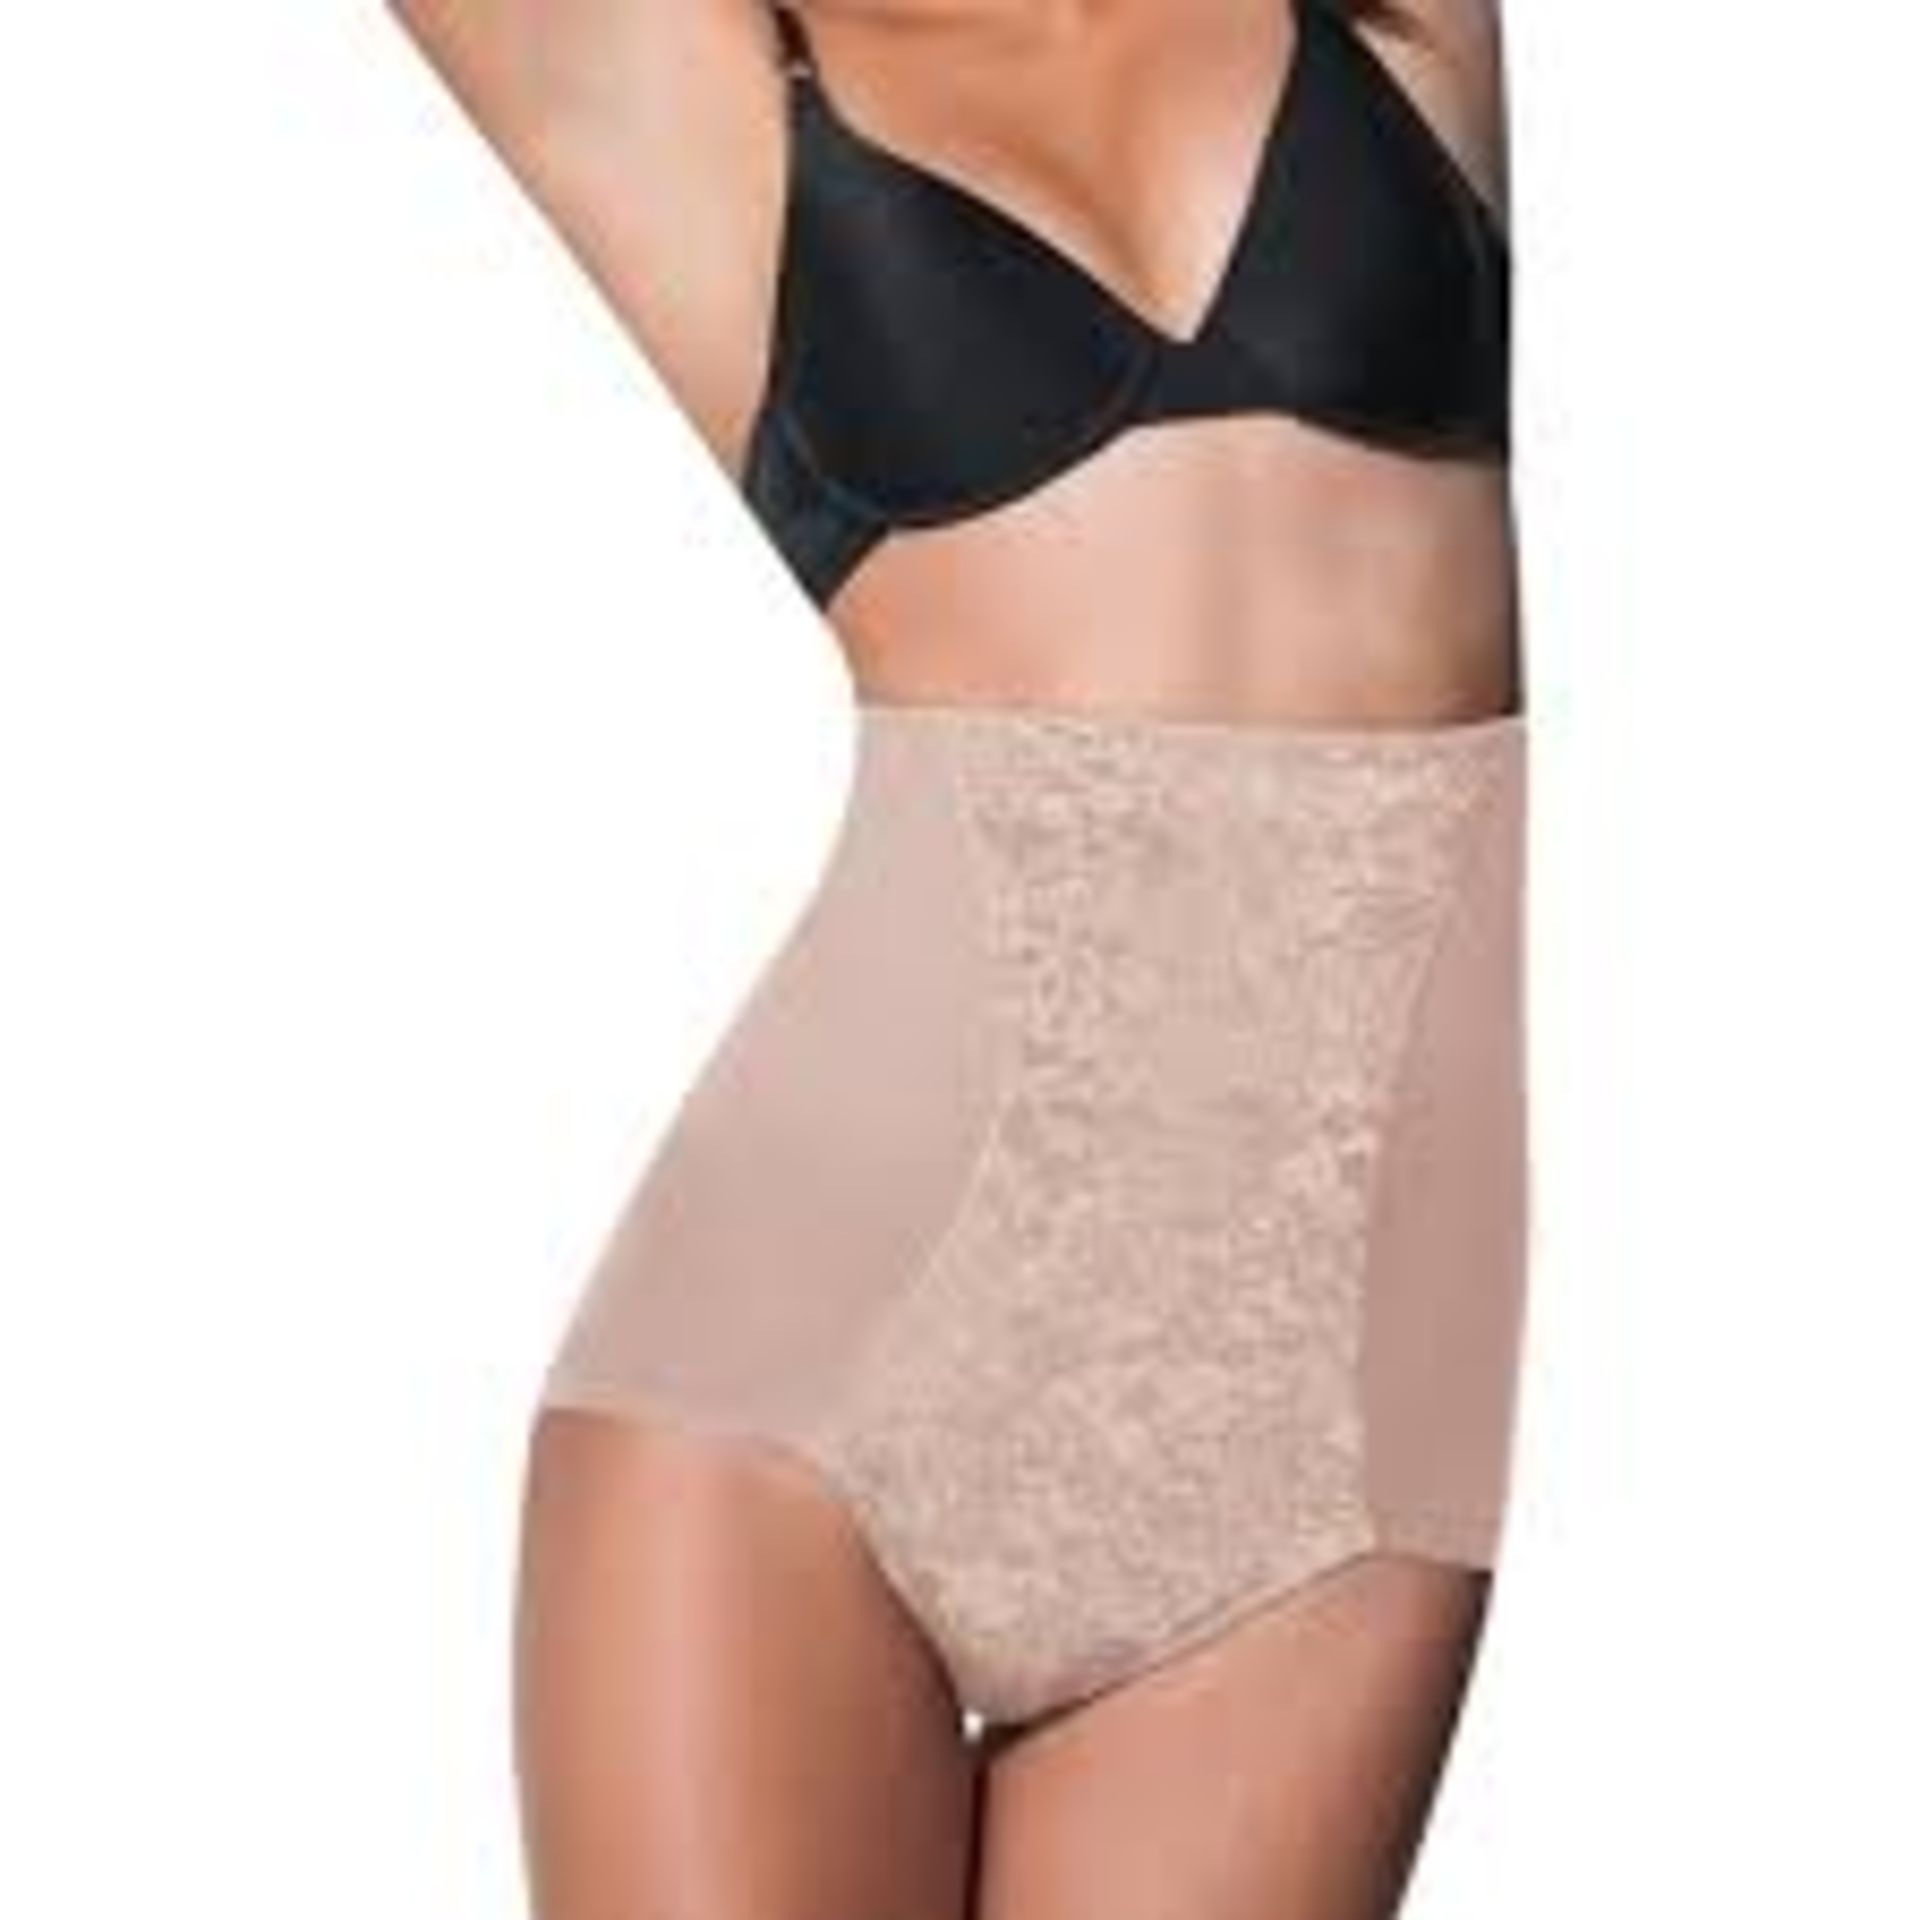 V Self Expressions Shapewear by Maidenform High Waist Brief Size L - nude colour, Couture Collection - Image 2 of 2